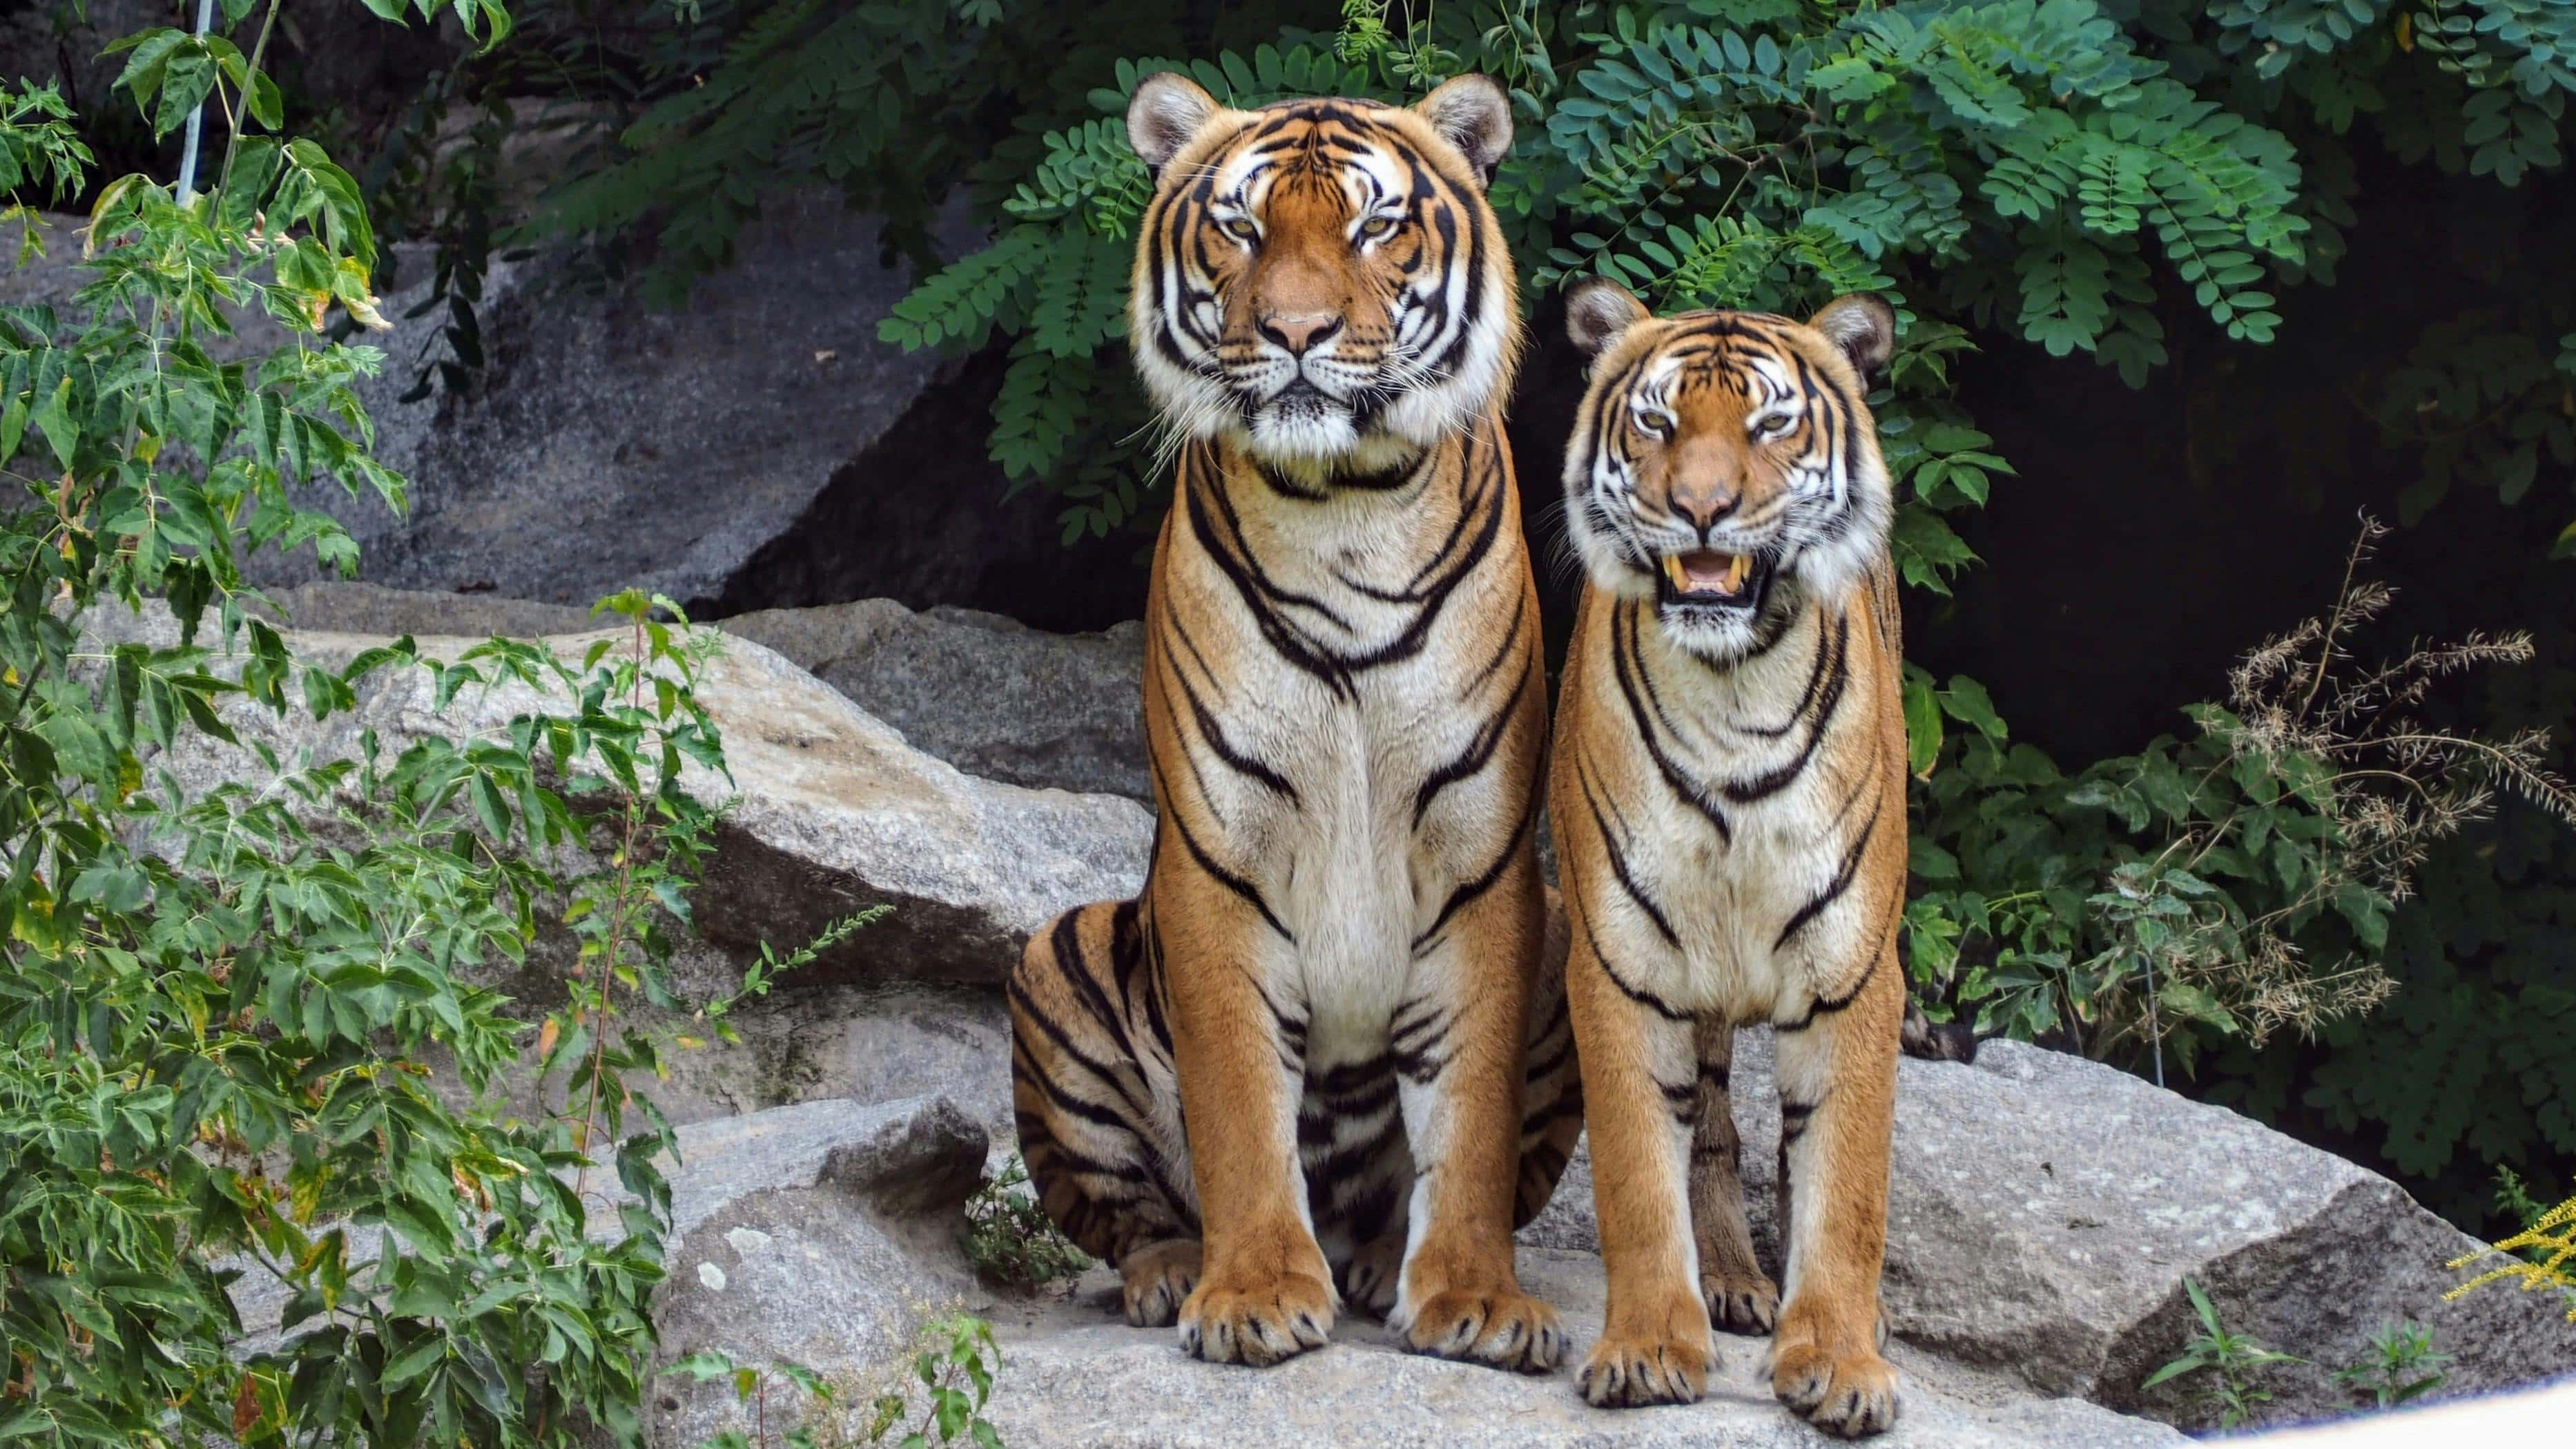 Two tigers stand next to each other on rocks with green leaves in the background.